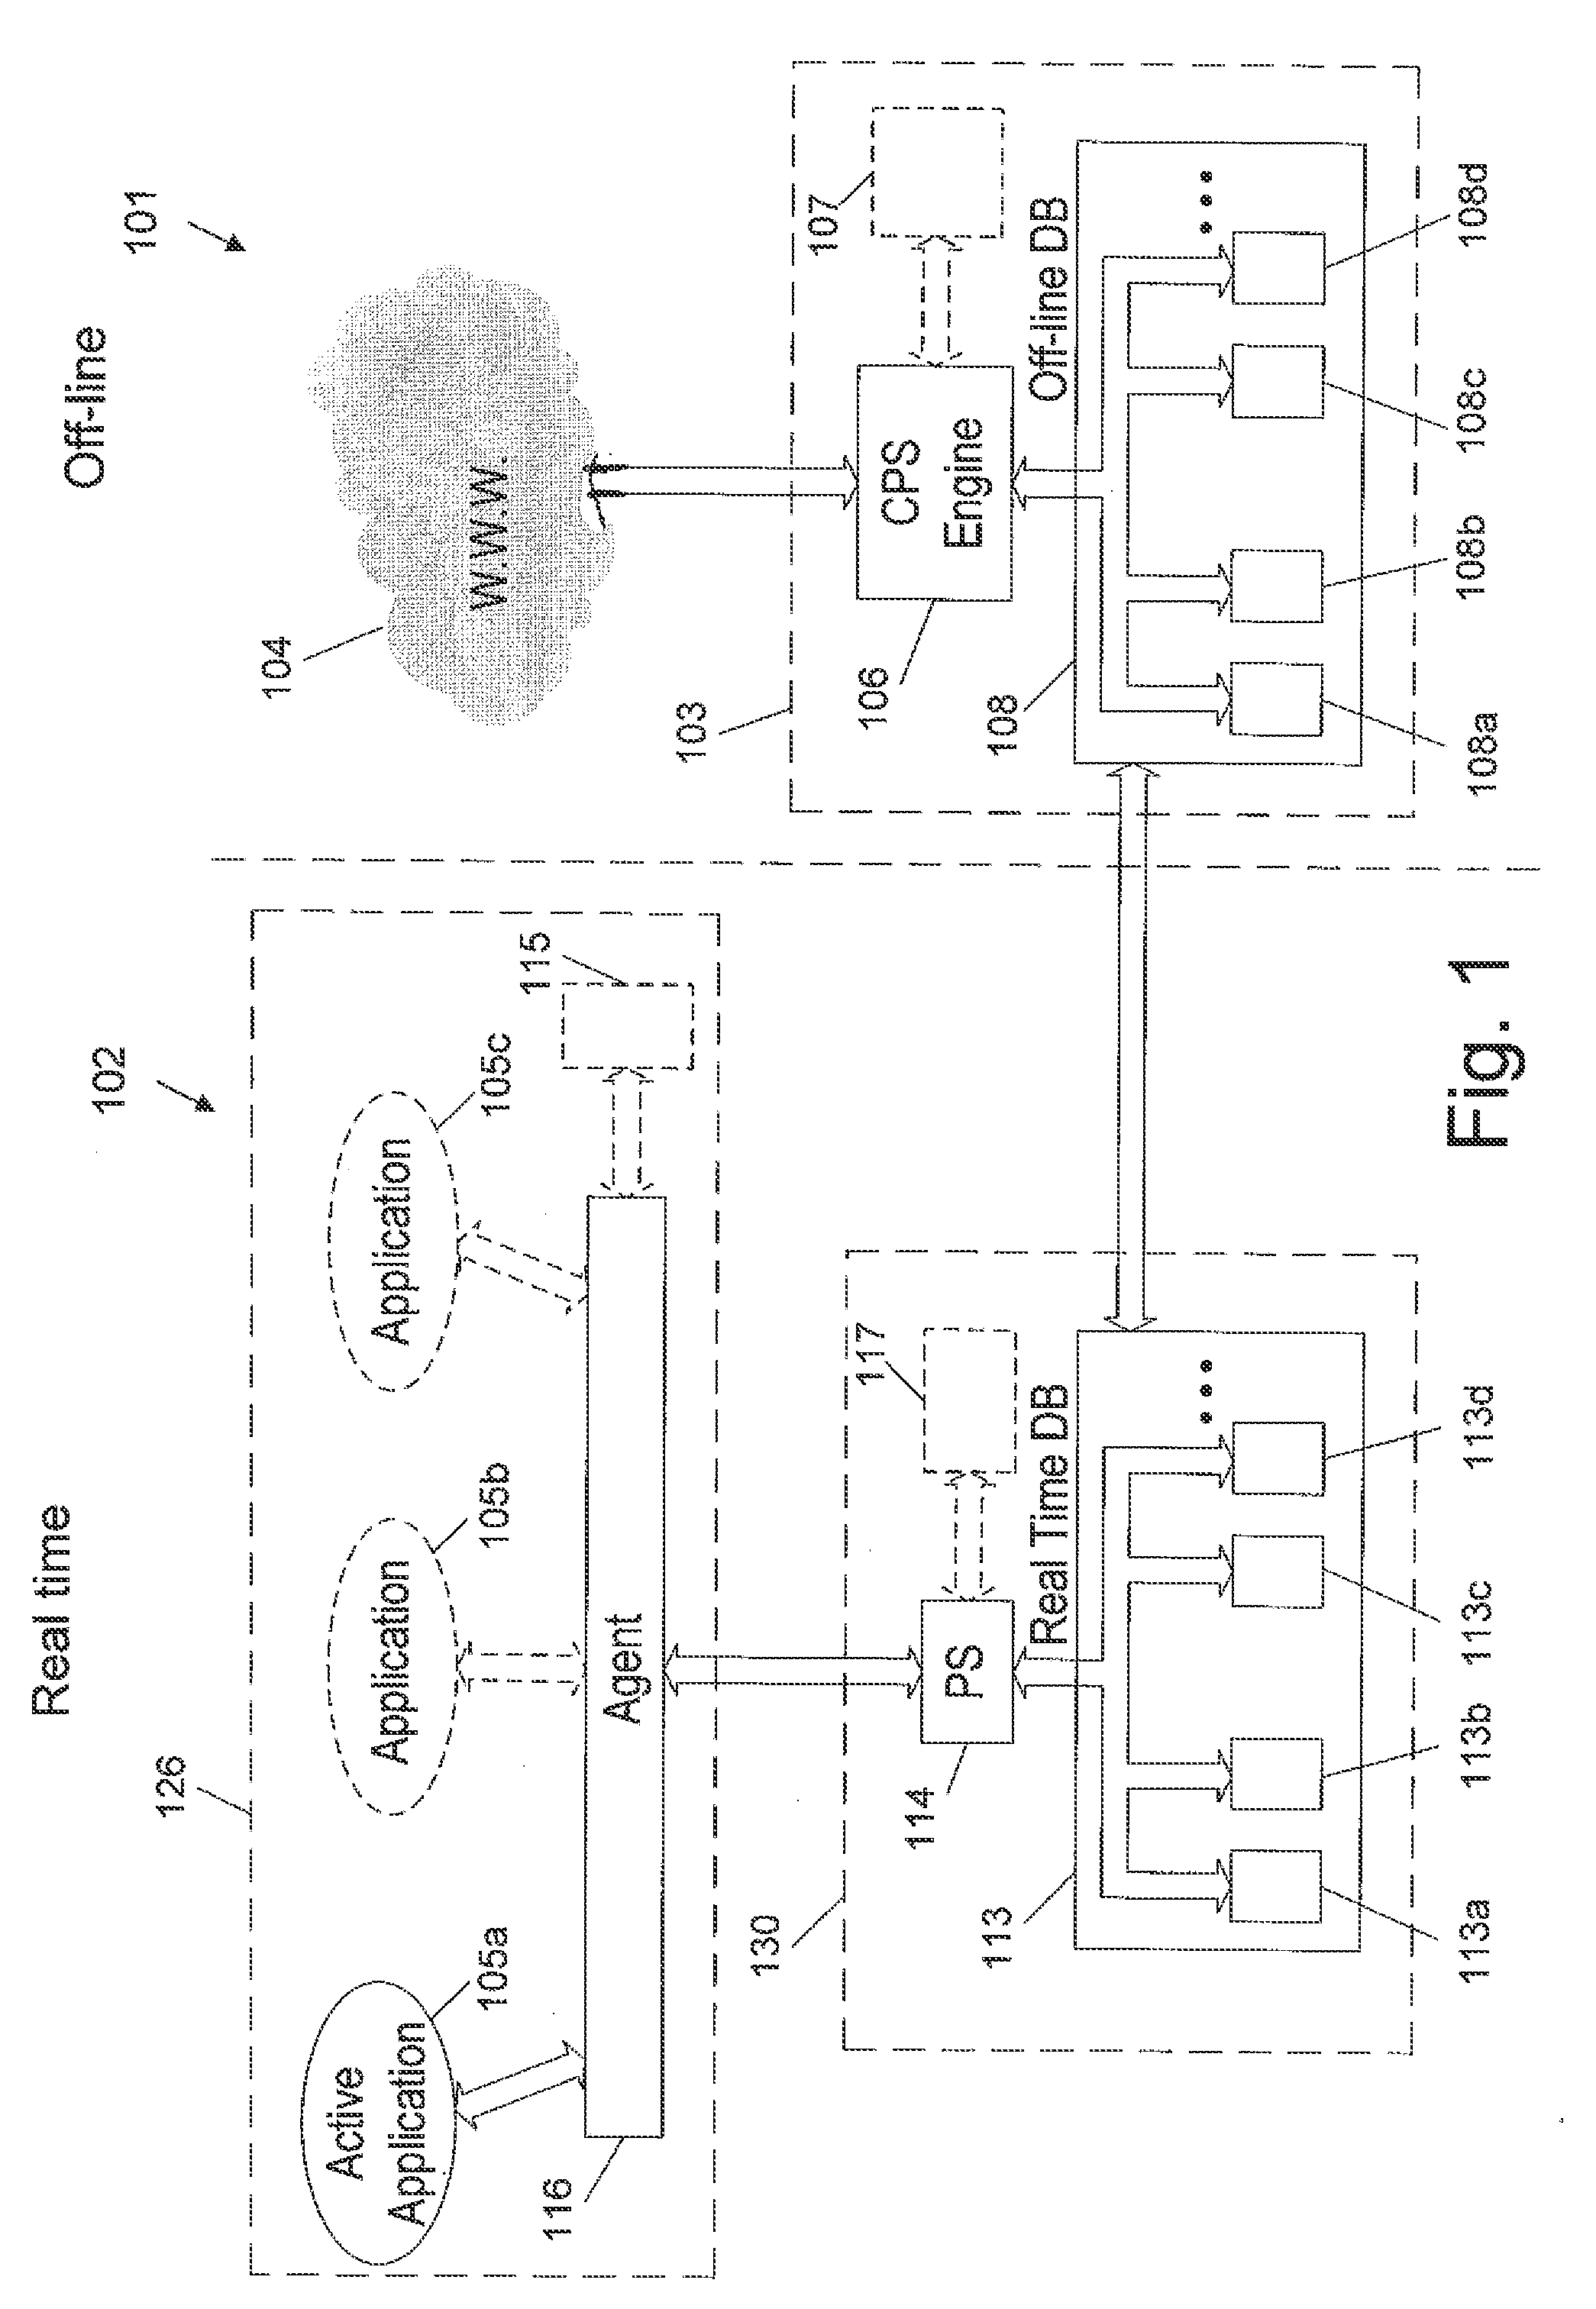 Method and System for Assisting in Typing